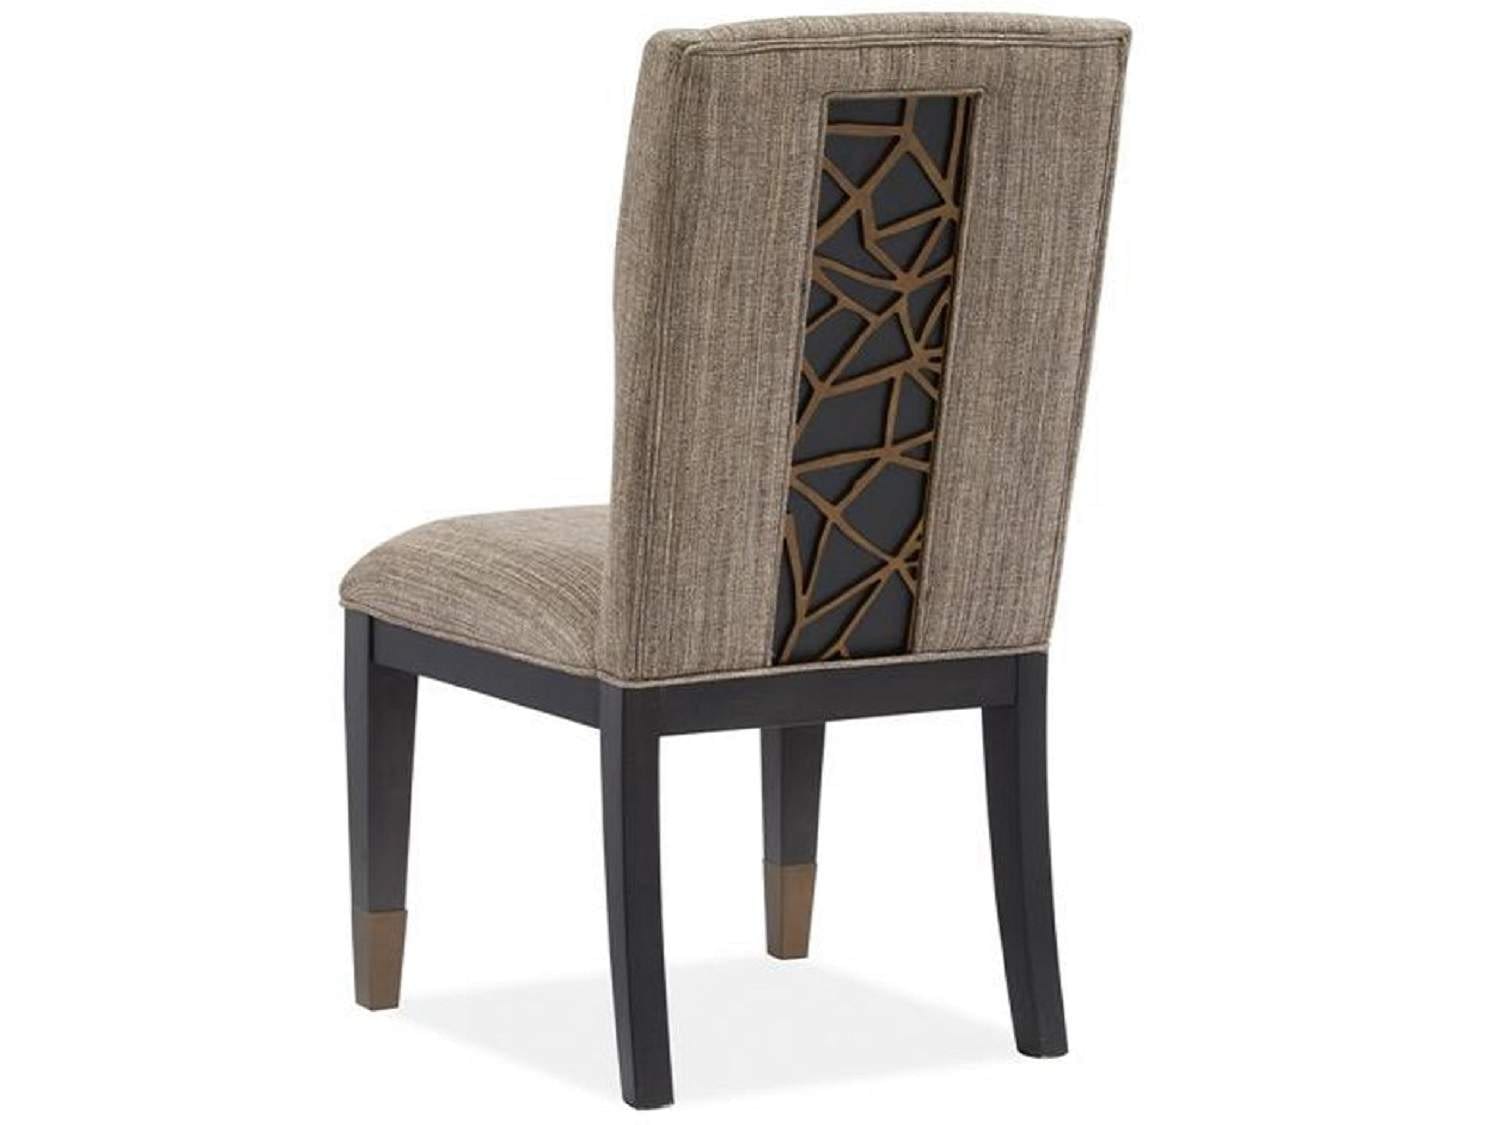 WINONA Dining Chair - Back